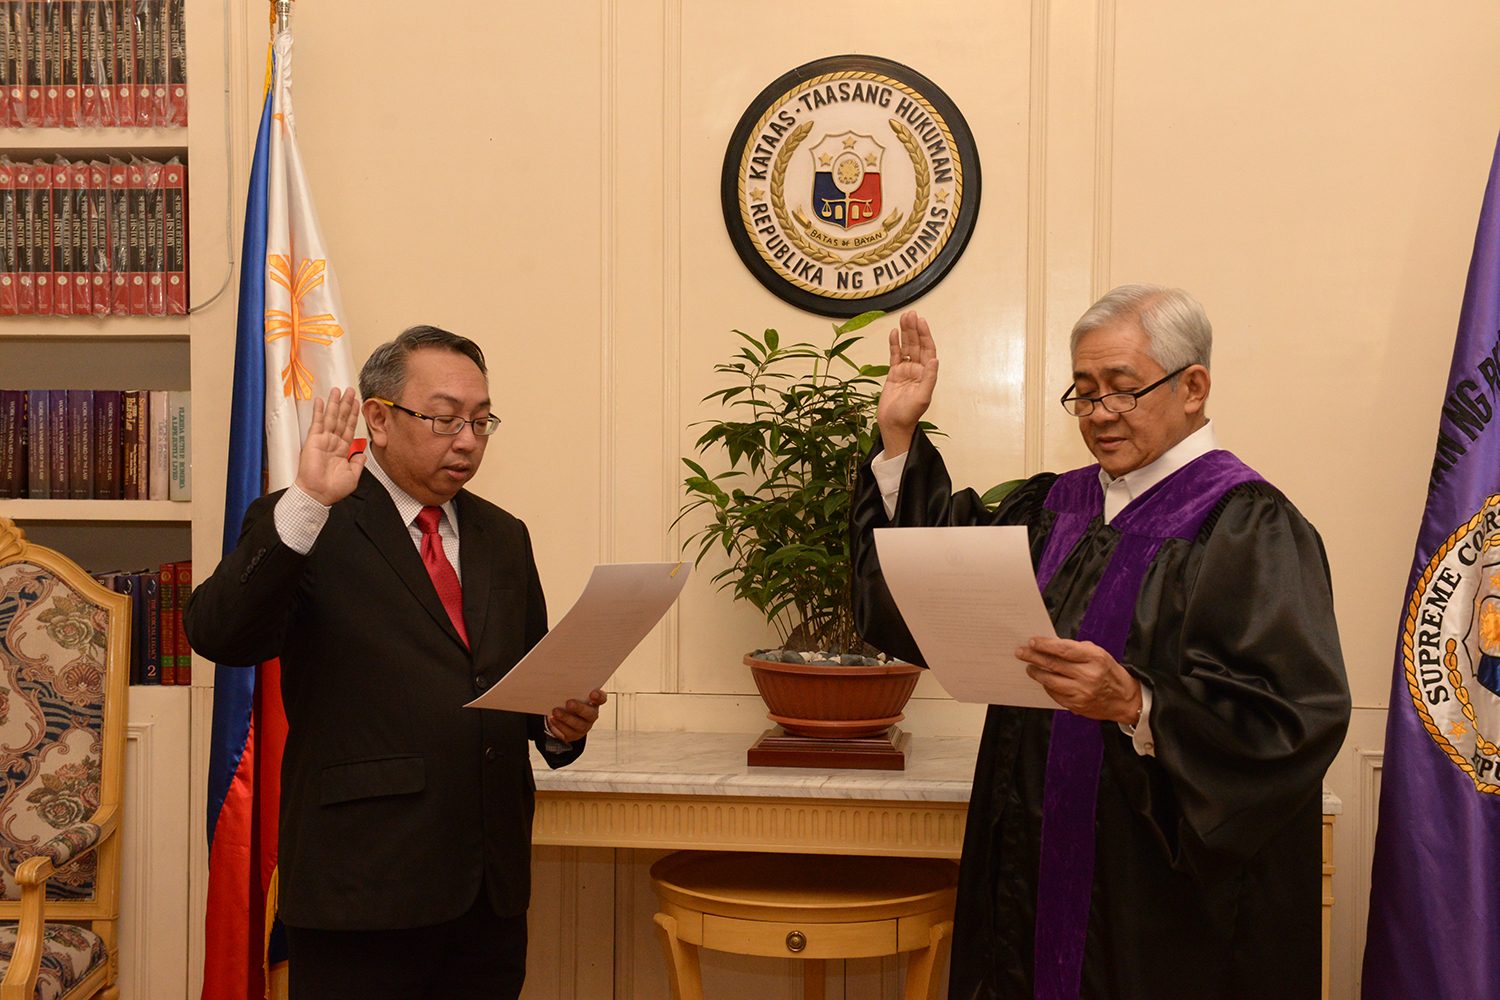 Sandiganbayan Associate Michael Frederick Musngi takes his oath before Justice Francis Jardeleza.  